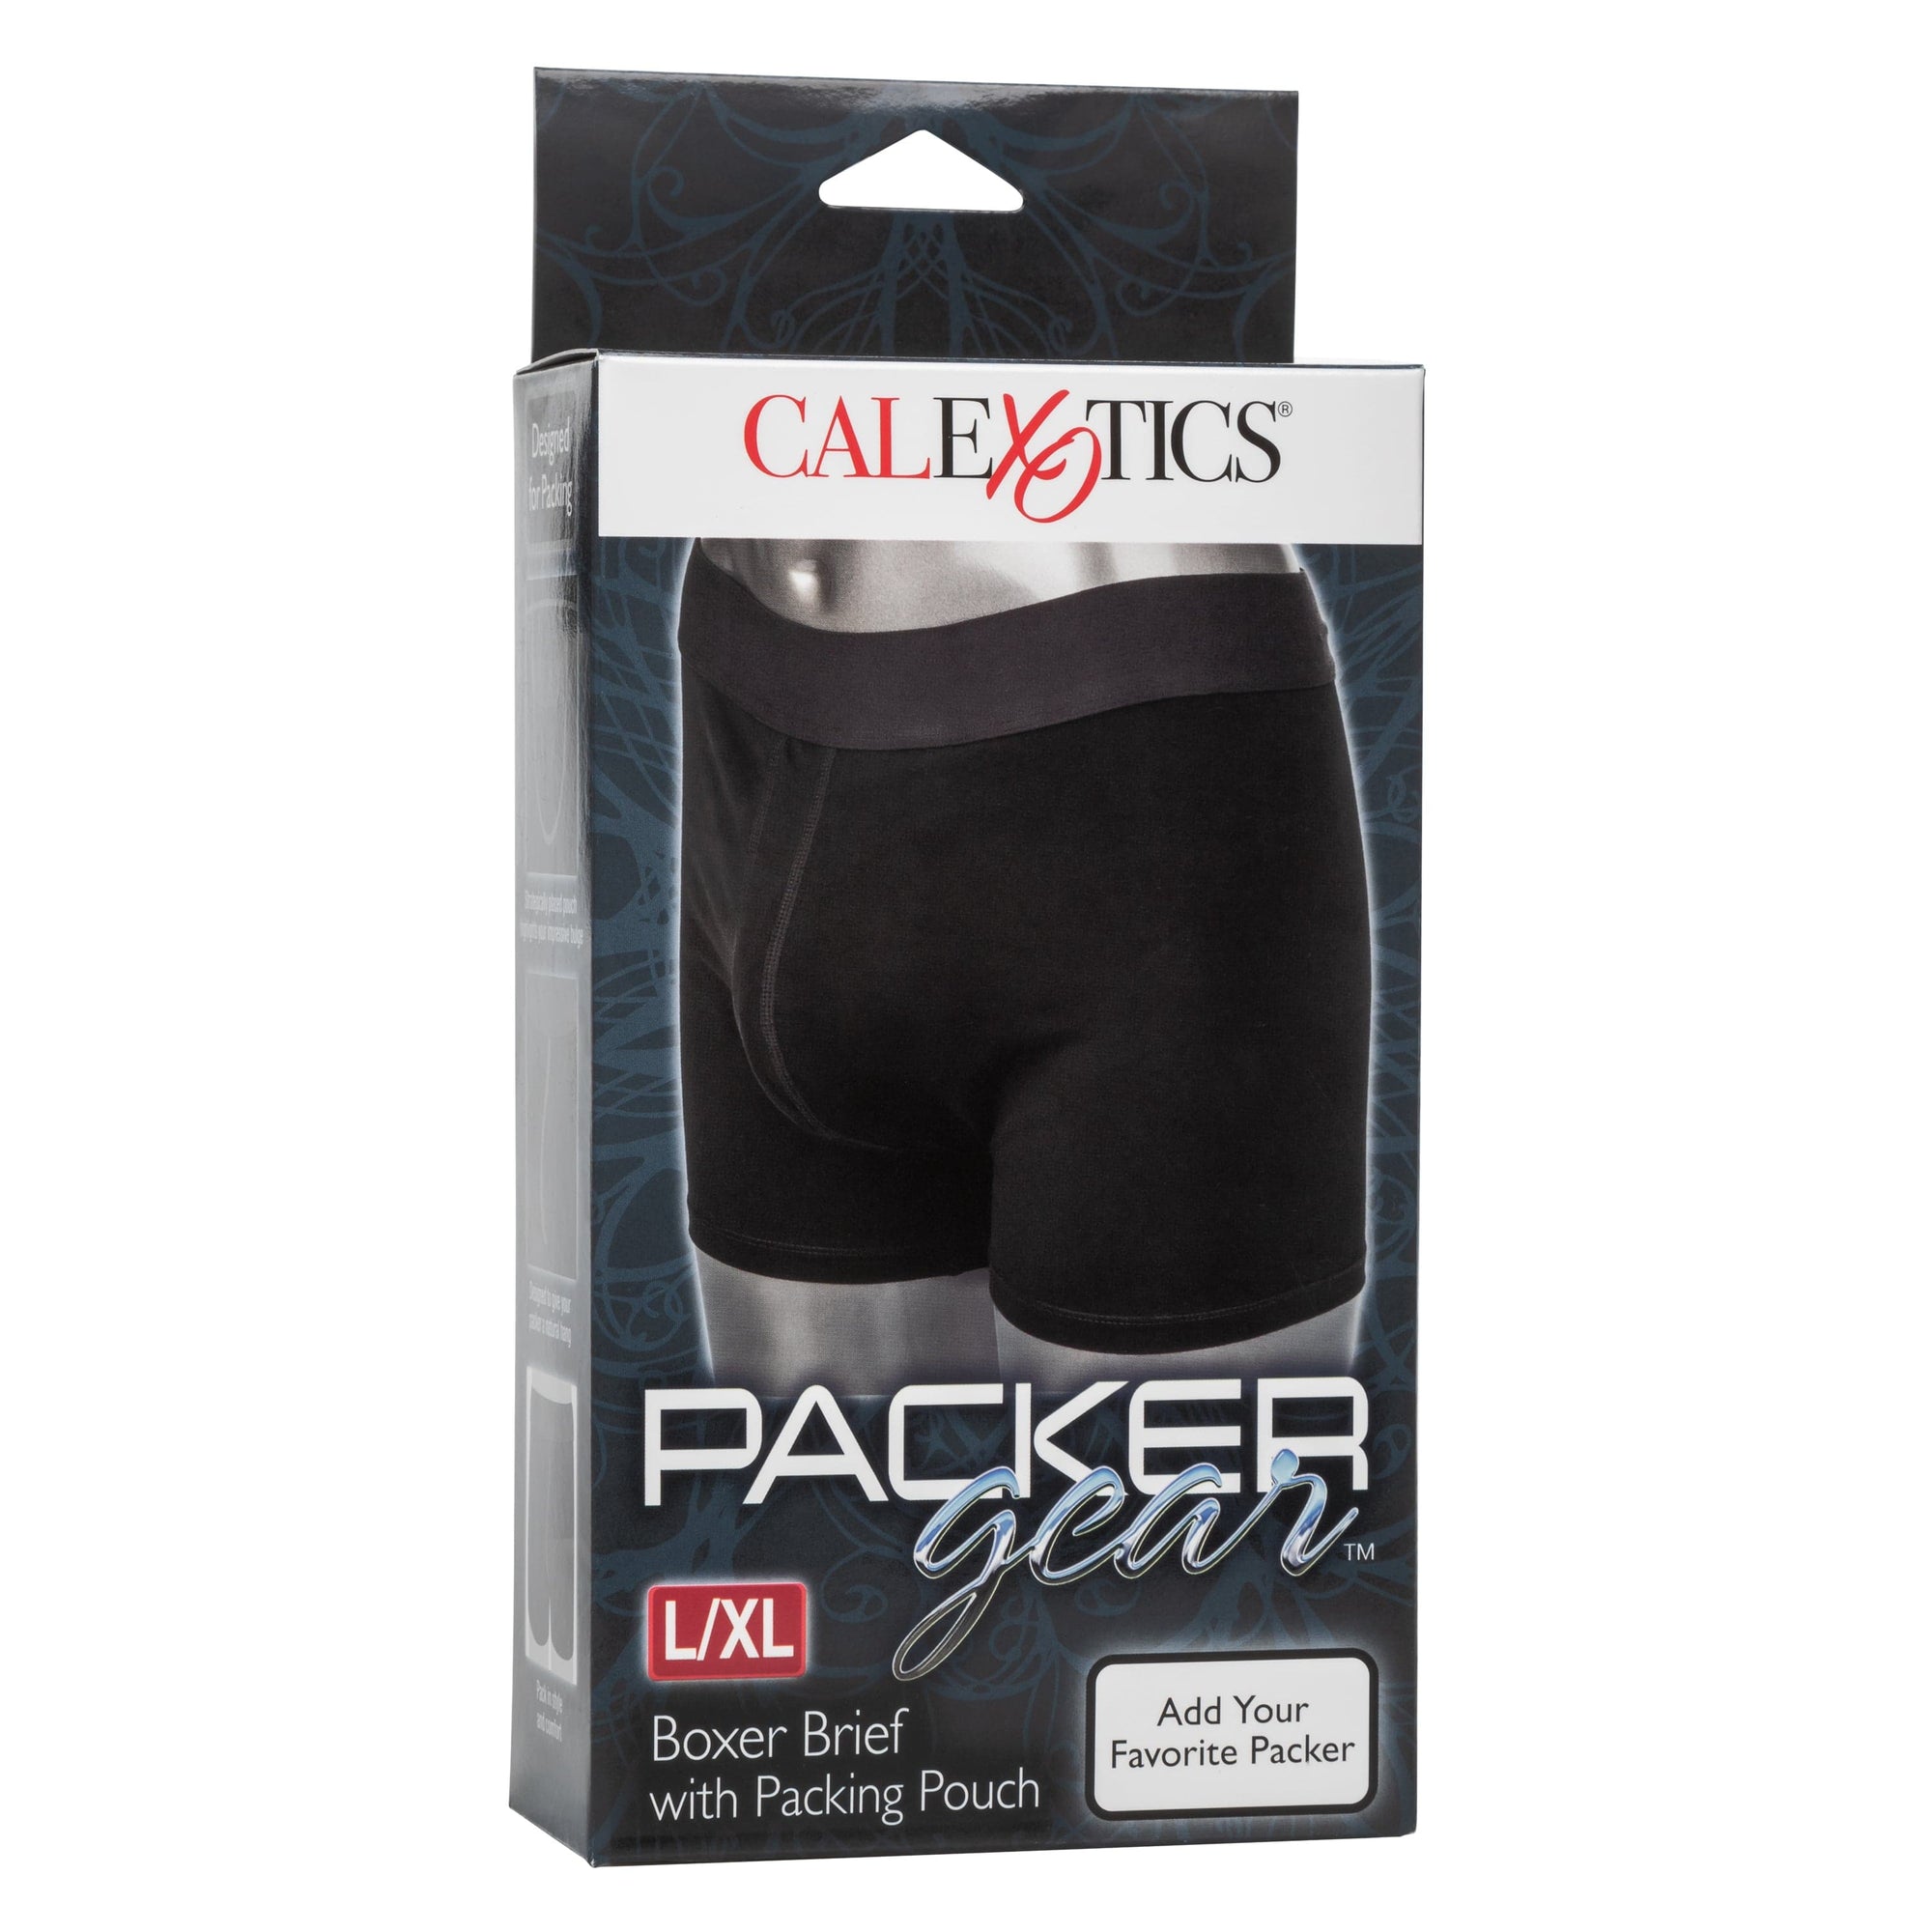 California Exotics - Packer Gear Boxer Brief Strap On Harness with Packing Pouch L/XL (Black) -  Strap On w/o Dildo  Durio.sg